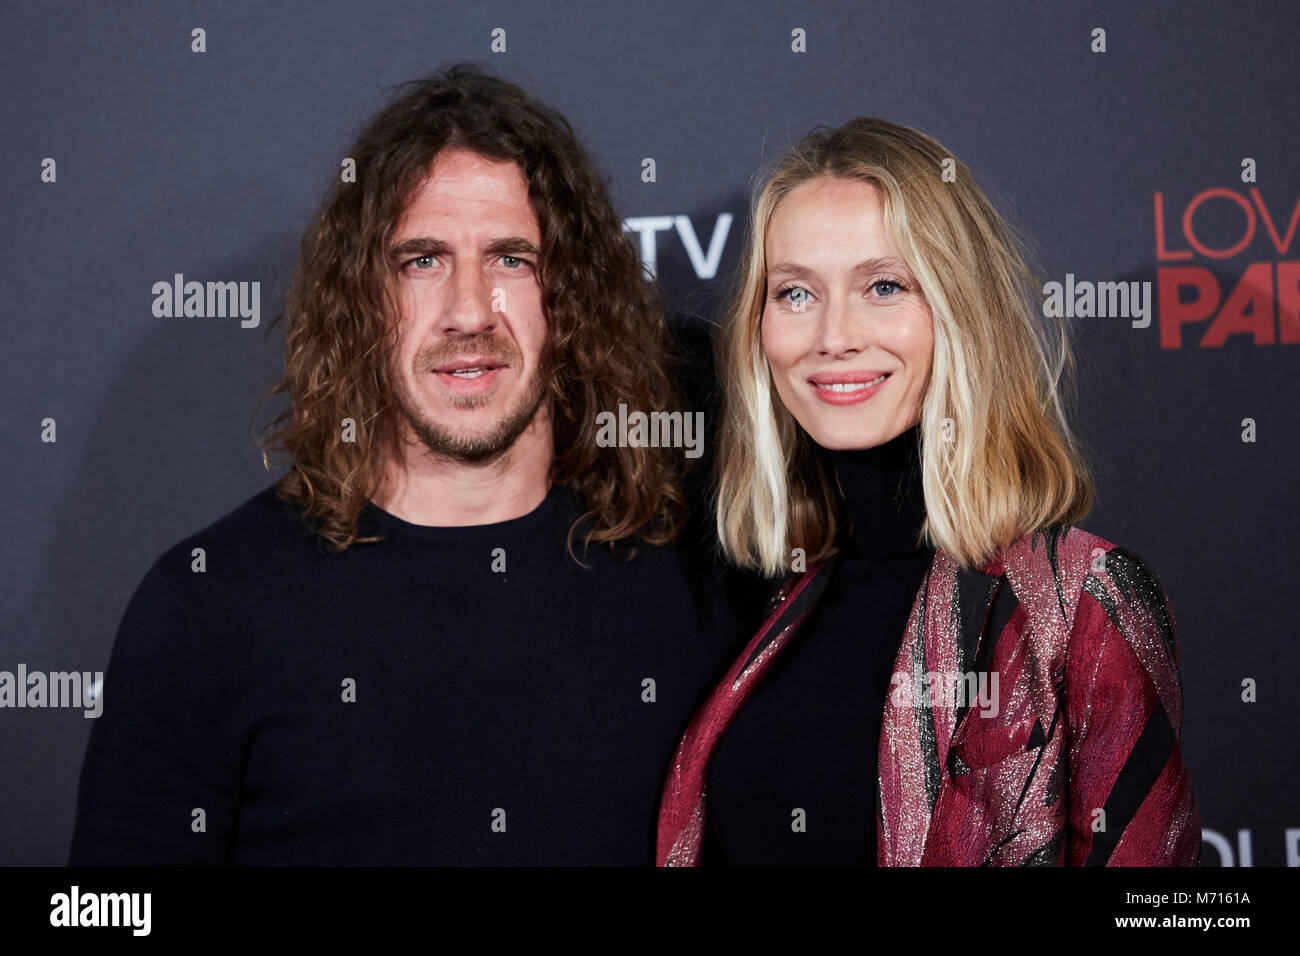 Madrid, Spain. 7th March, 2018. Carles Puyol y Vanessa Lorenzo during the premiere of the movie 'Loving Pablo' Madrid 07/03/2018 Credit: Gtres Información más Comuniación on line, S.L./Alamy Live News Stock Photo